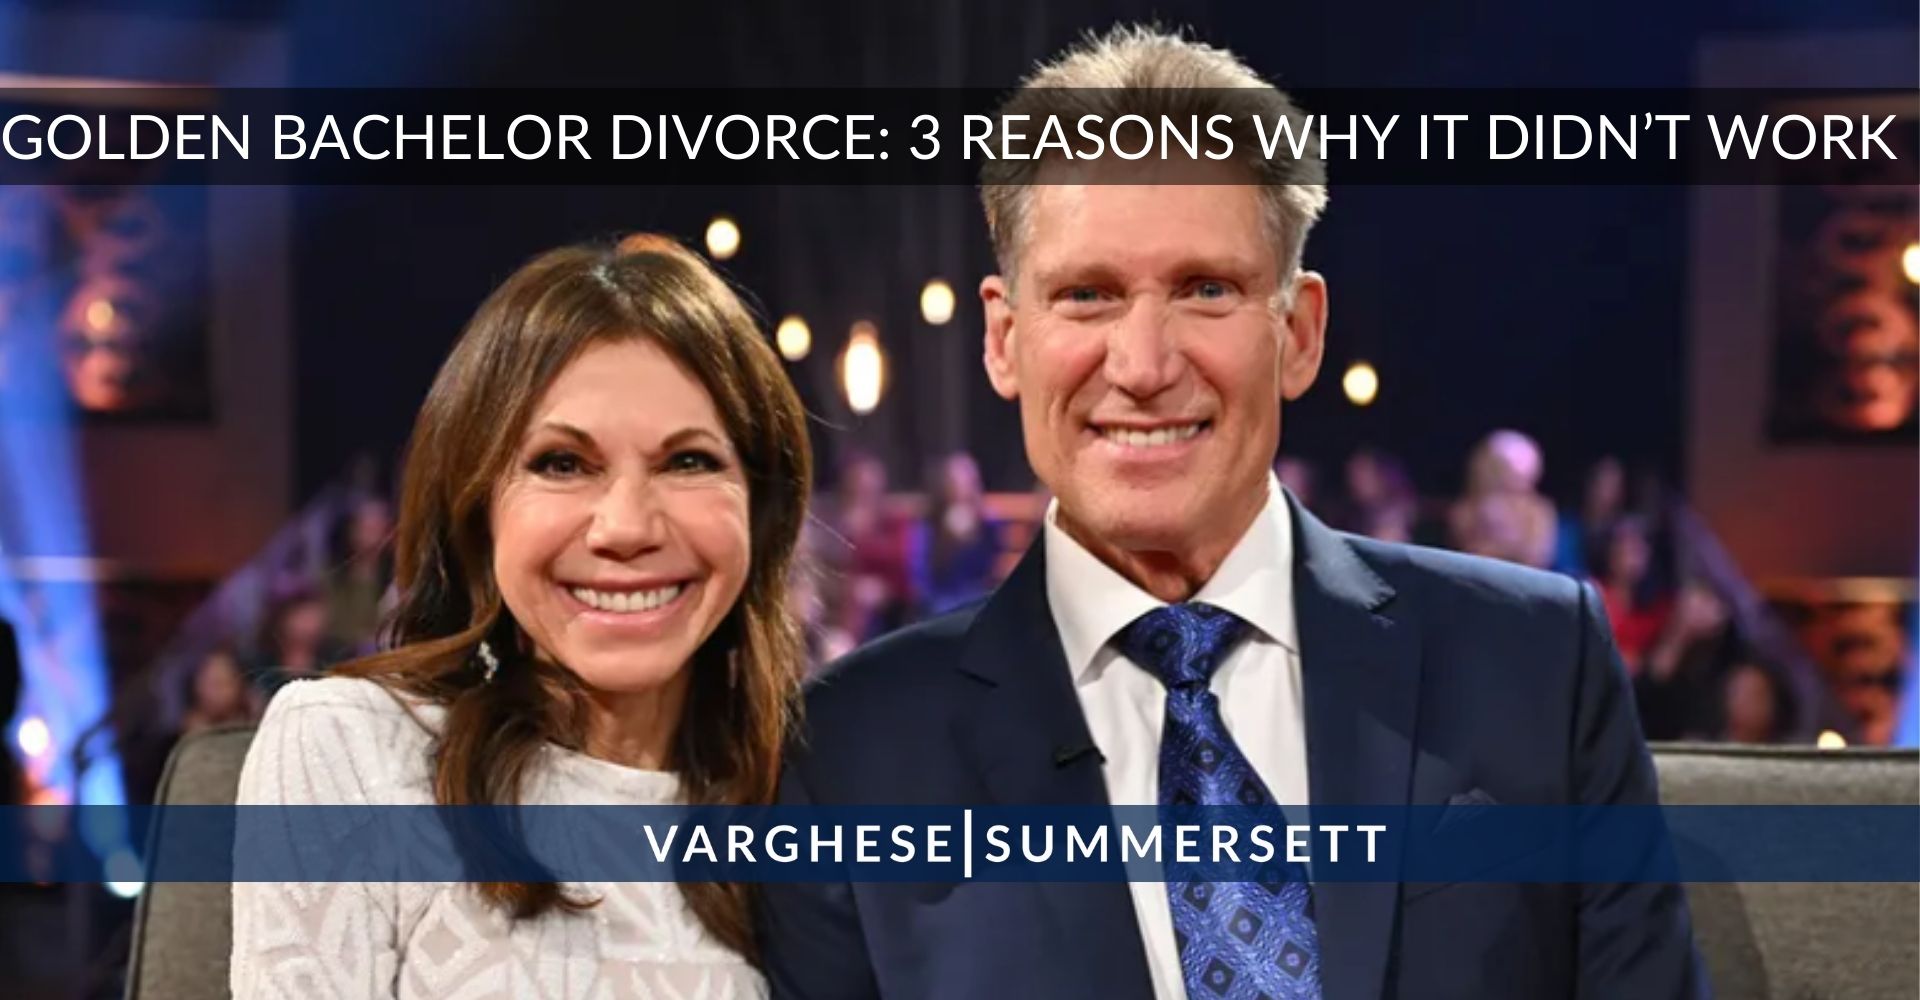 Golden Bachelor Divorce: 3 Reasons Why It Didn’t Work